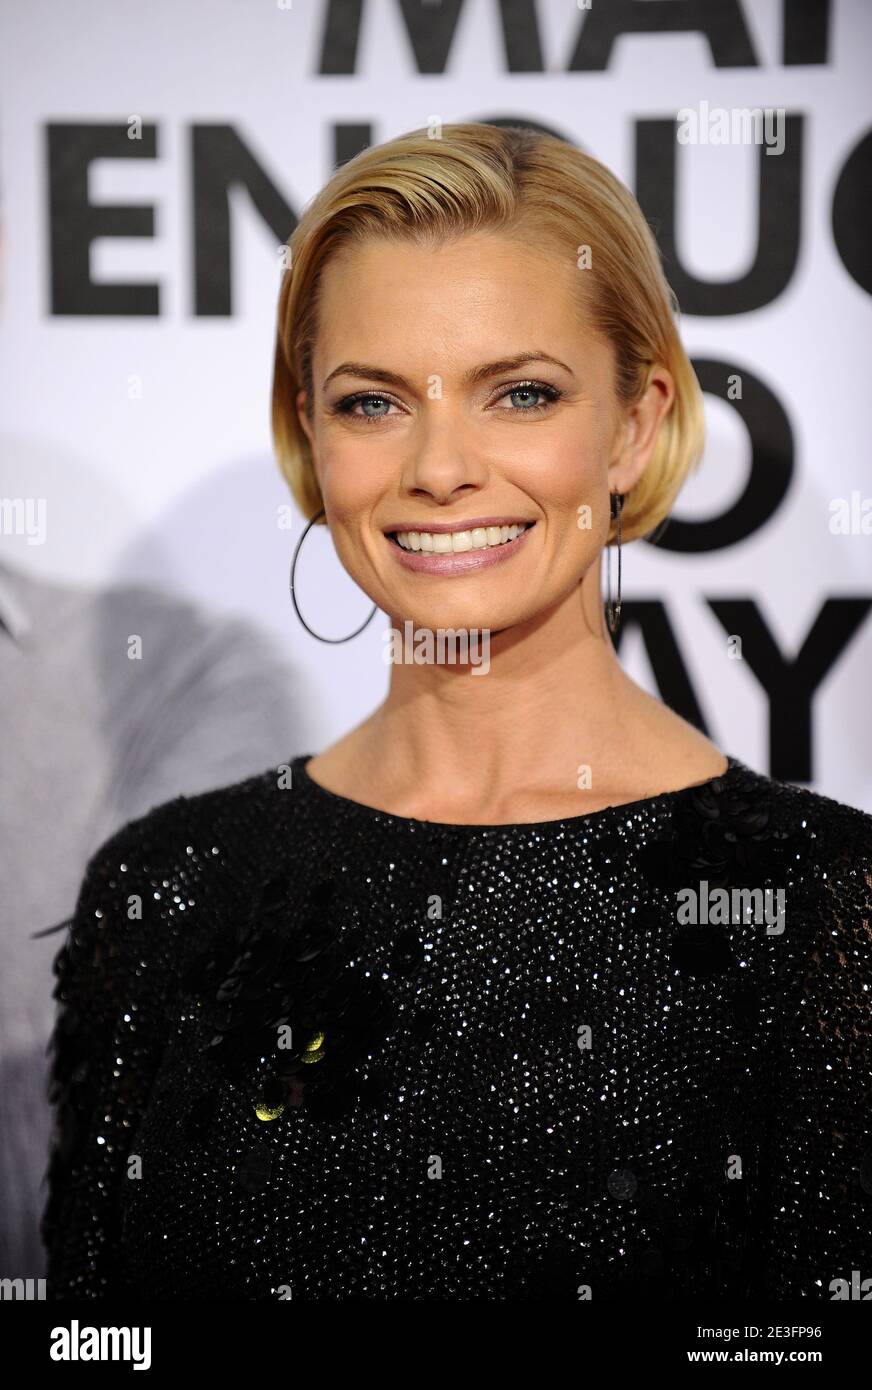 Jaime Pressly attending the premiere of 'I Love You, Man' held at the Mann's Village Theater in Westwood, Los Angeles, CA, USA on March 17, 2009. Photo by Lionel Hahn/ABACAPRESS.COM Stock Photo